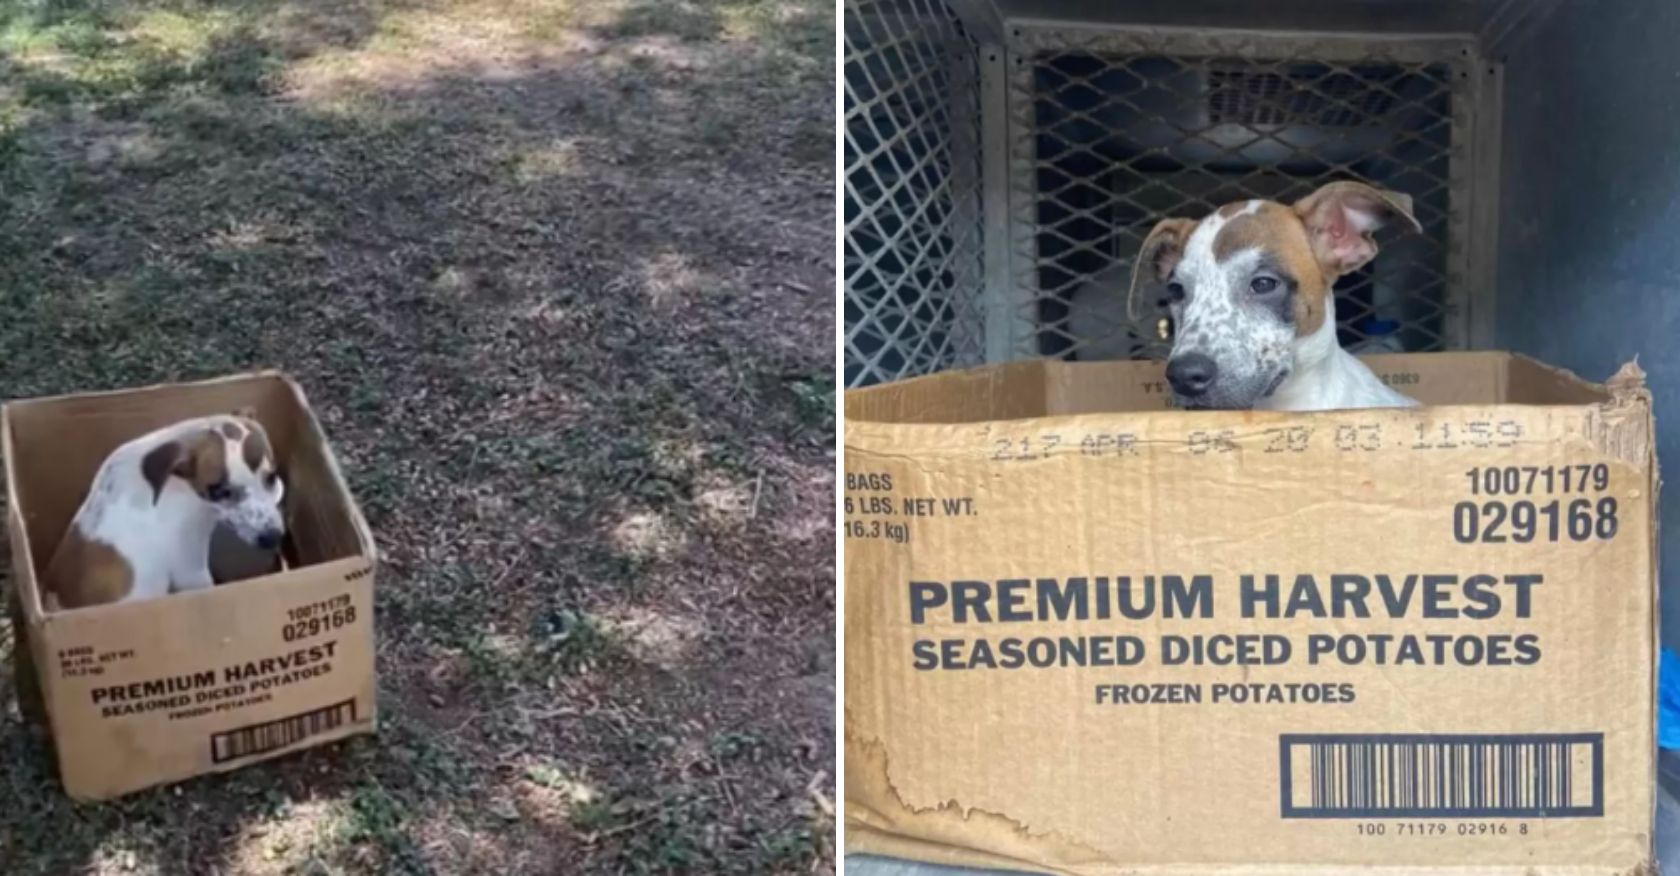 Owner Deserts Dog in Cardboard Box, But the Dog Stays, Awaiting Their Return."